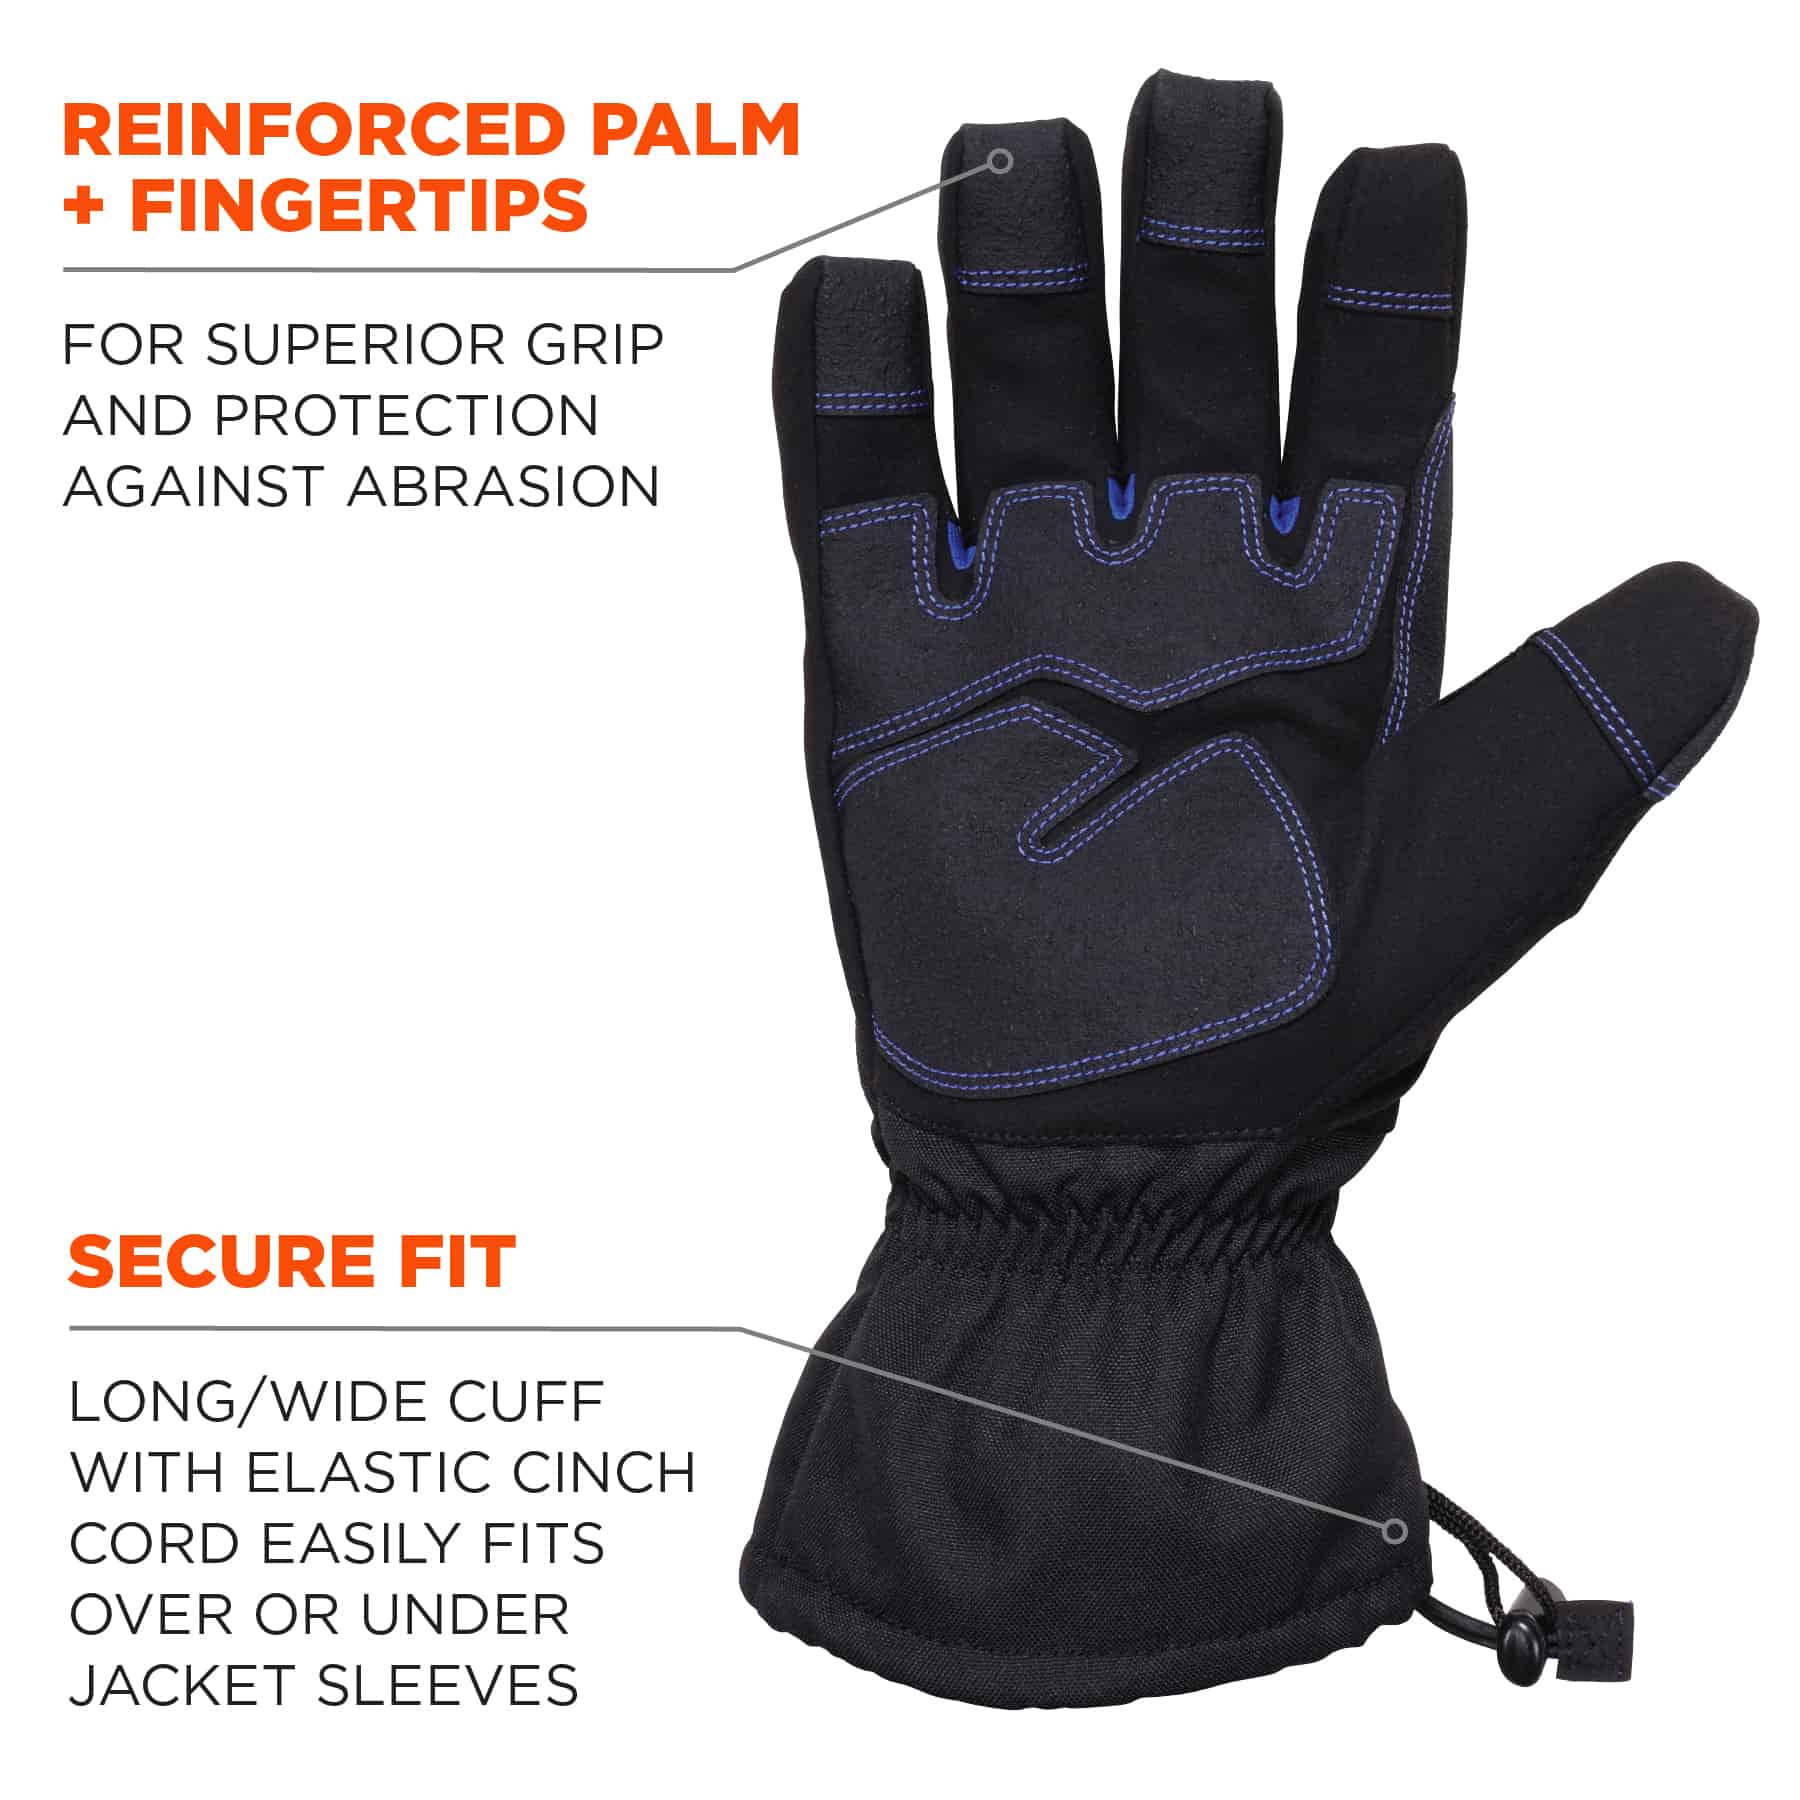 https://www.ergodyne.com/sites/default/files/product-images/17612-819wp-extreme-thermal-waterproof-winter-work-gloves-black-reinforced-palm-and-fingertips-and-secure-fit.jpg